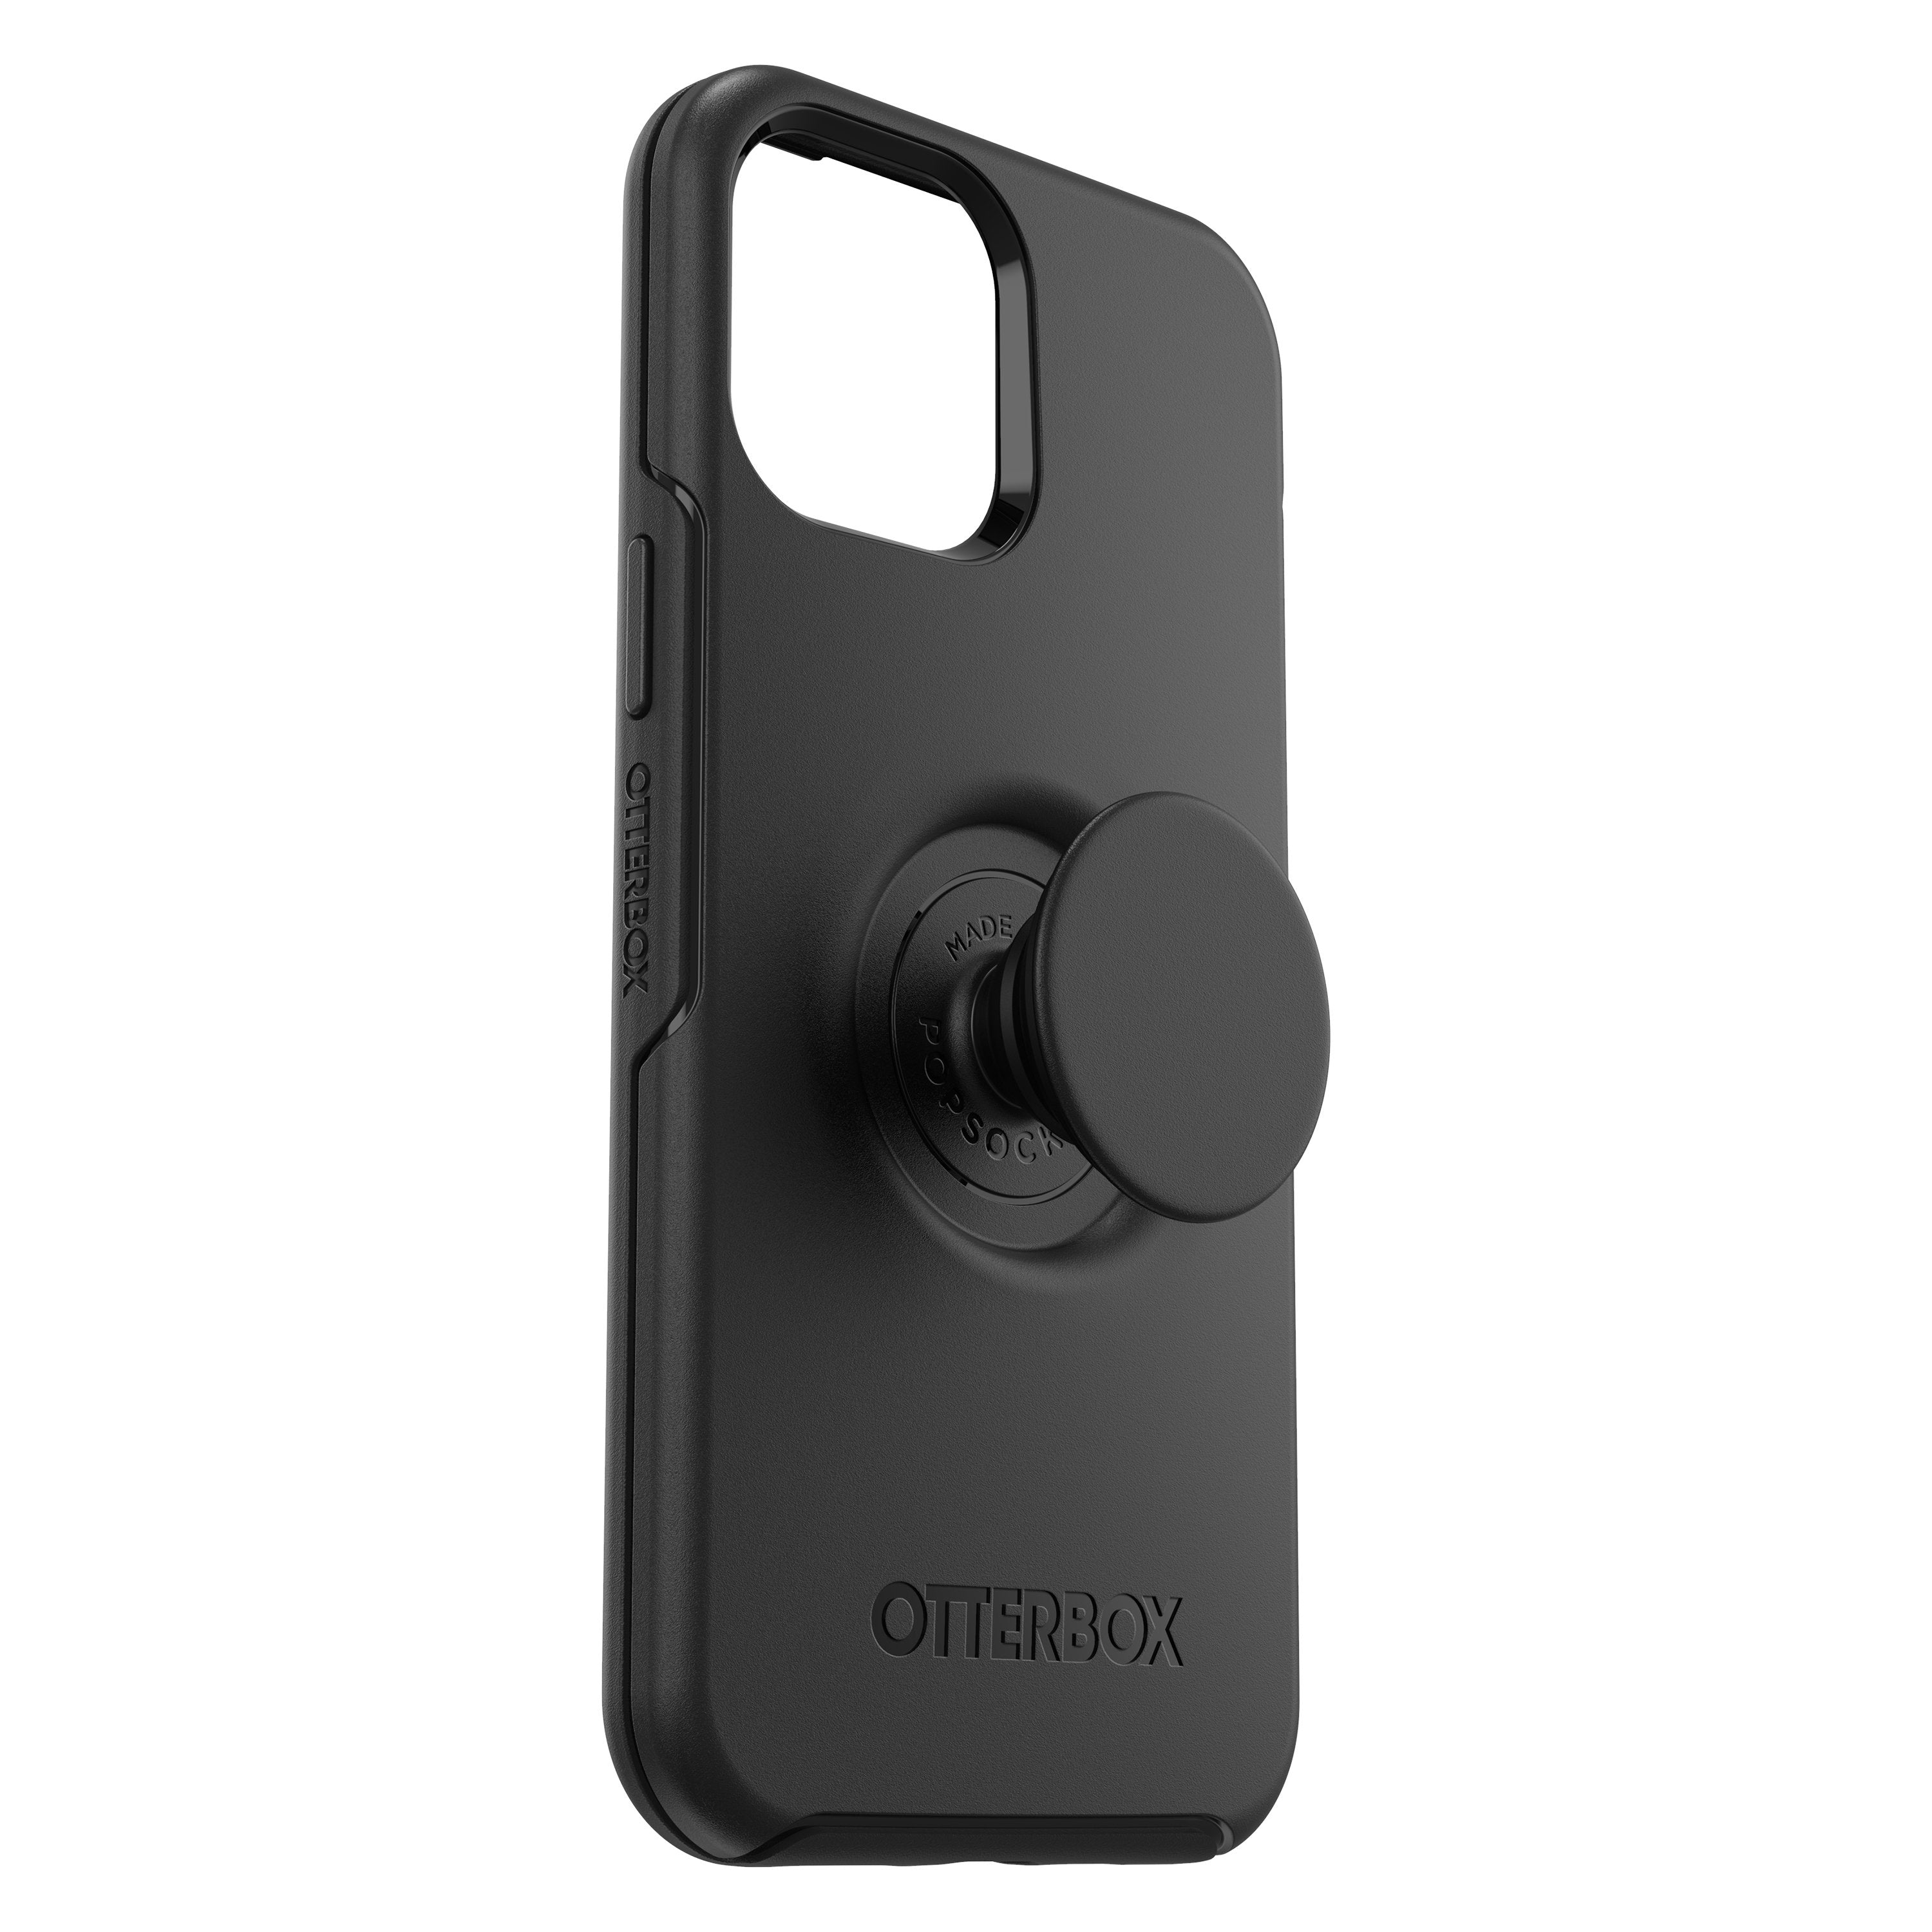 OtterBox OTTER+POP SYMMETRY Apple iPhone 12 Pro Max case - Drop Protection Cover w/ PopSocket Phone Holder, Slim Protective Selfie Case, Wireless Charging Compatible - Black